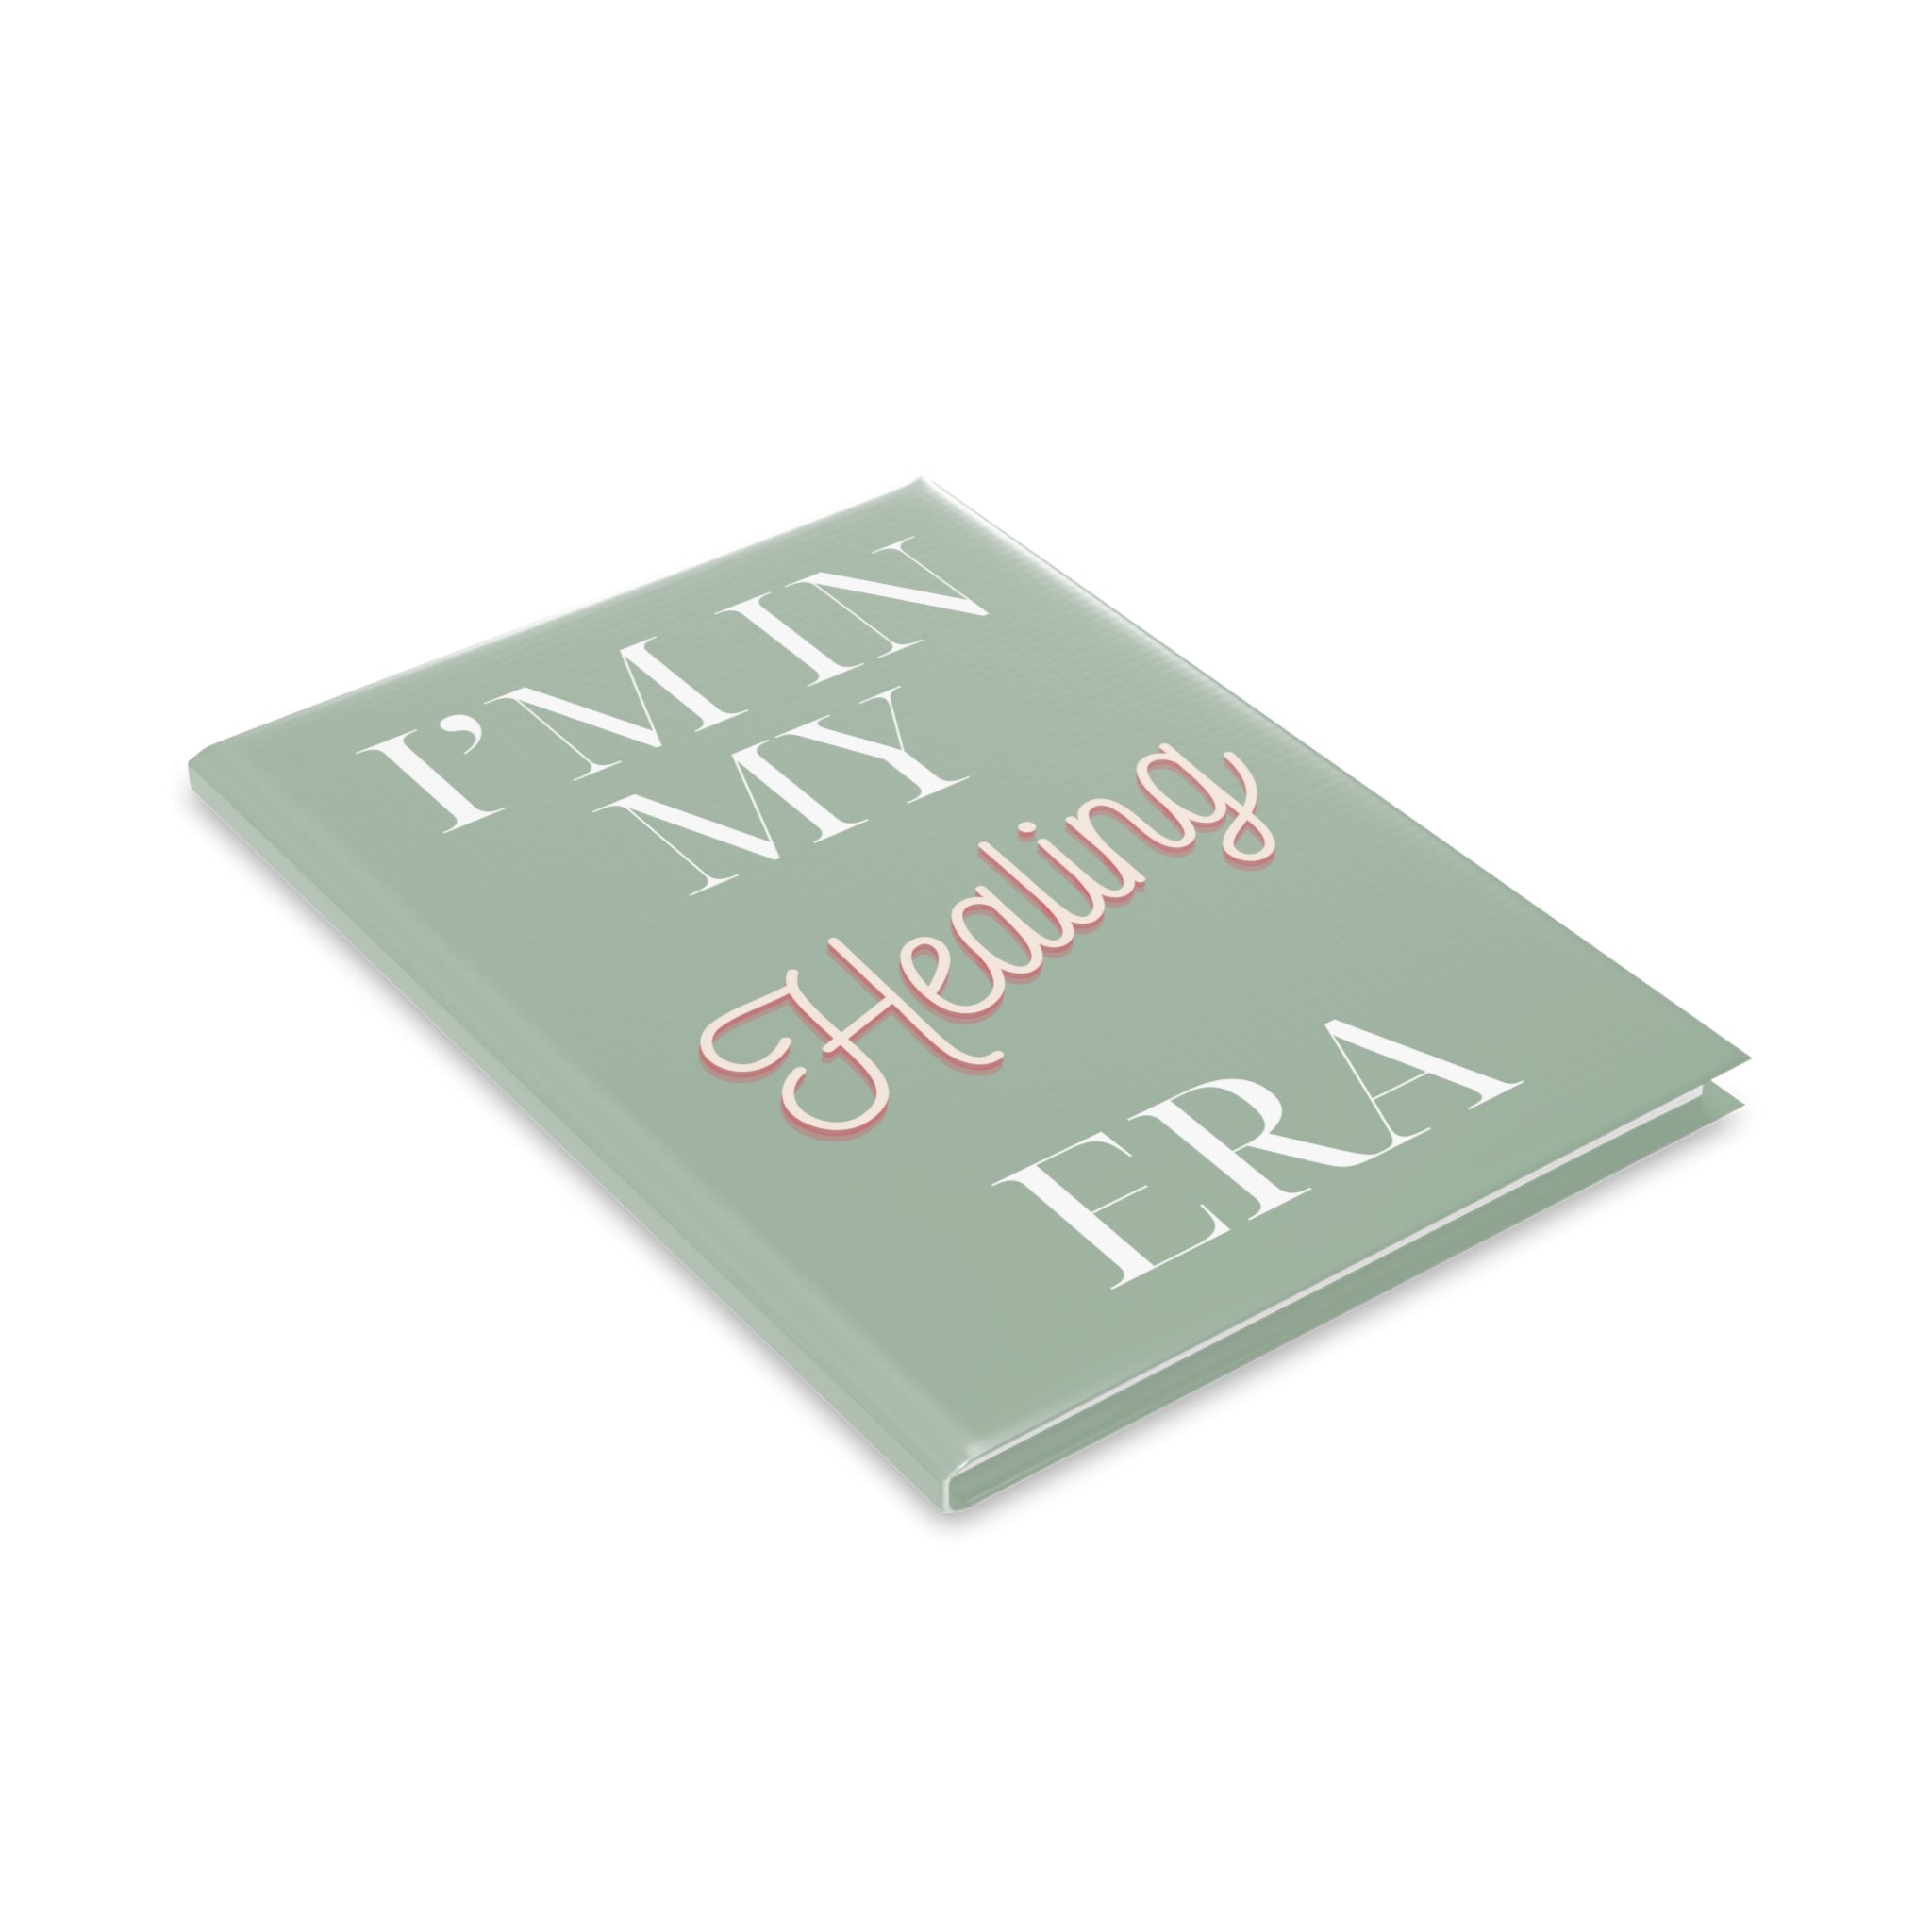 "I'm in my Healing Era"- Hardcover Notebook with Puffy Covers - 3 sizes